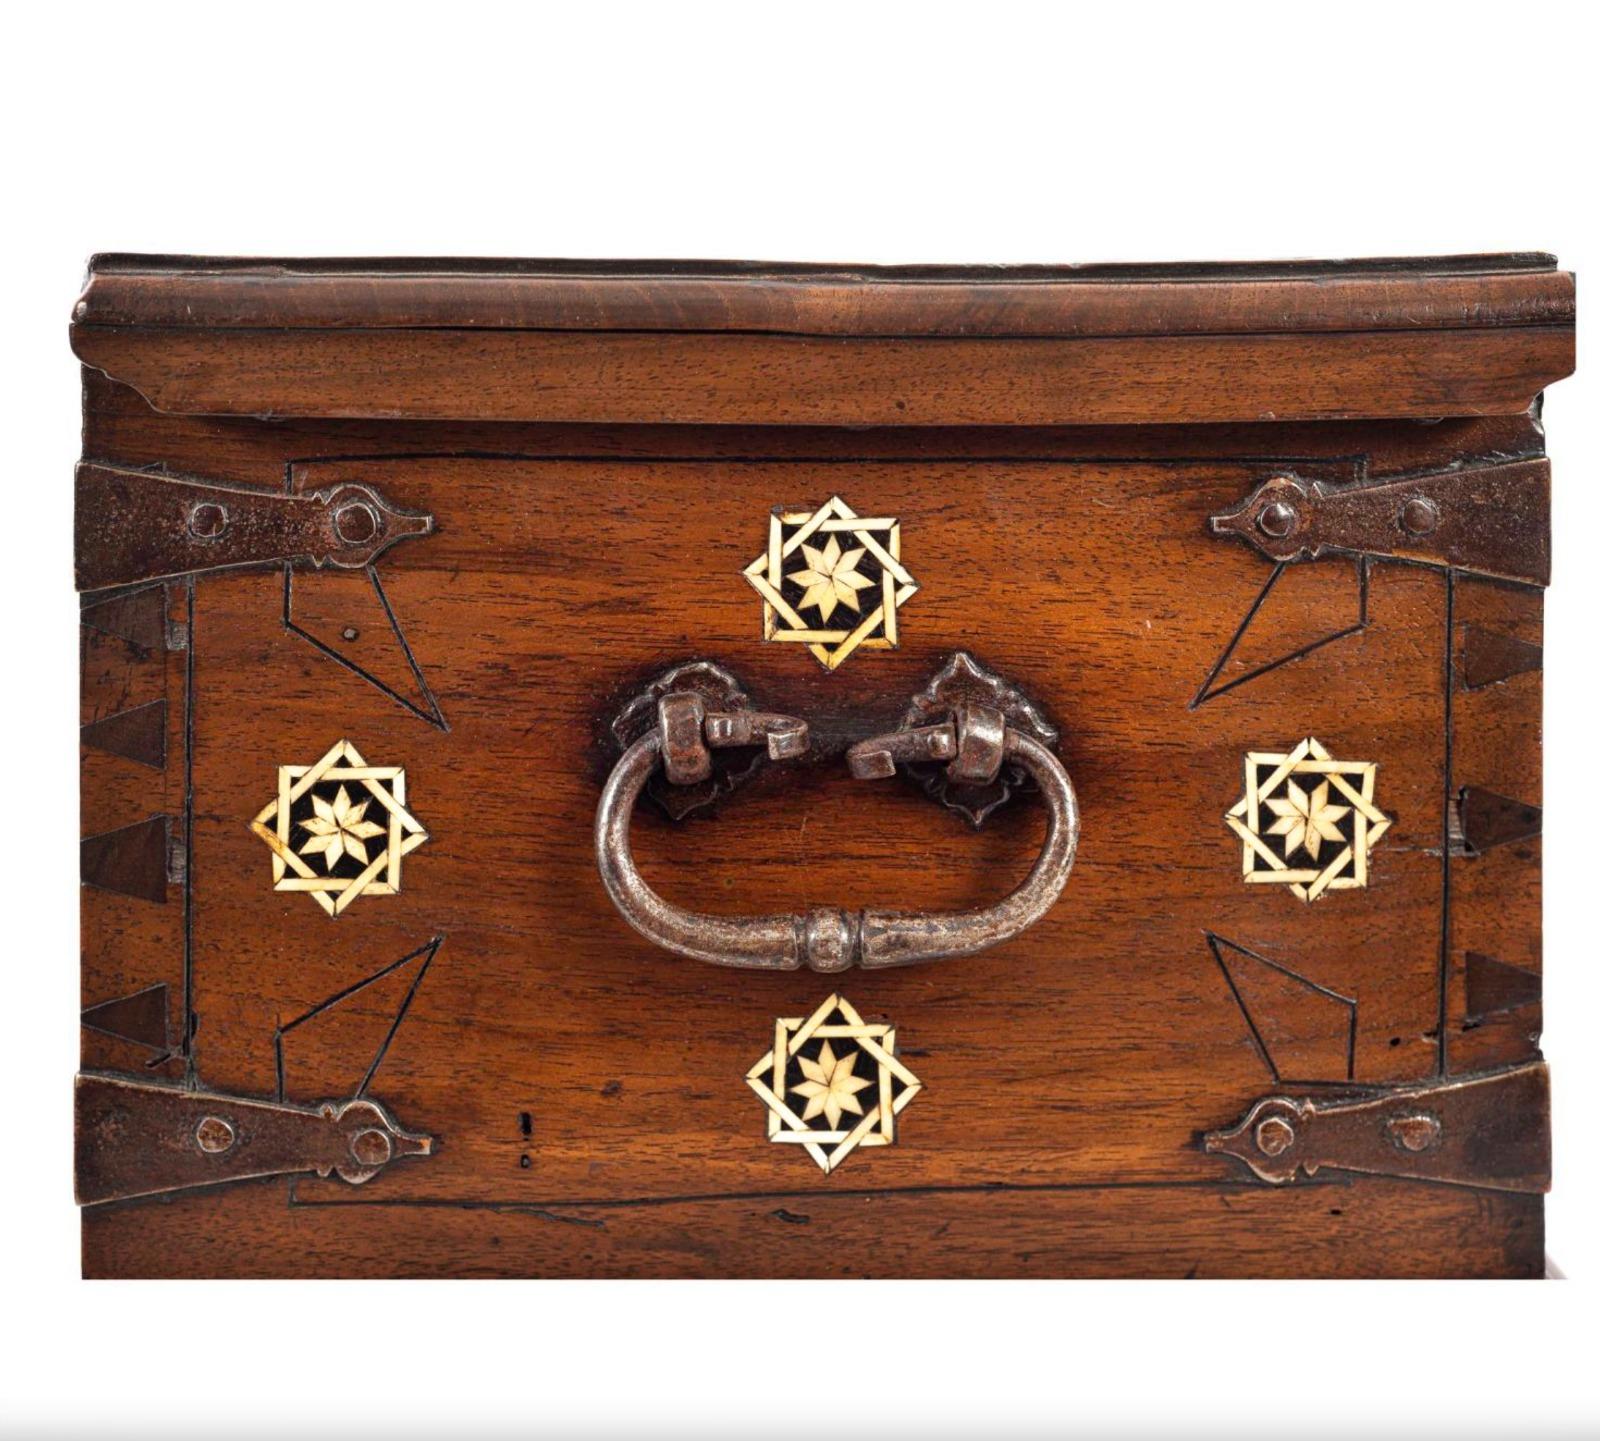 Walnut wood box with geometric inlay in bone and ebony. Spain
17th century
Iron reinforcements and side handles. Attach key.
Measures: 22.5 x 42 x 30 cm.
good condition.